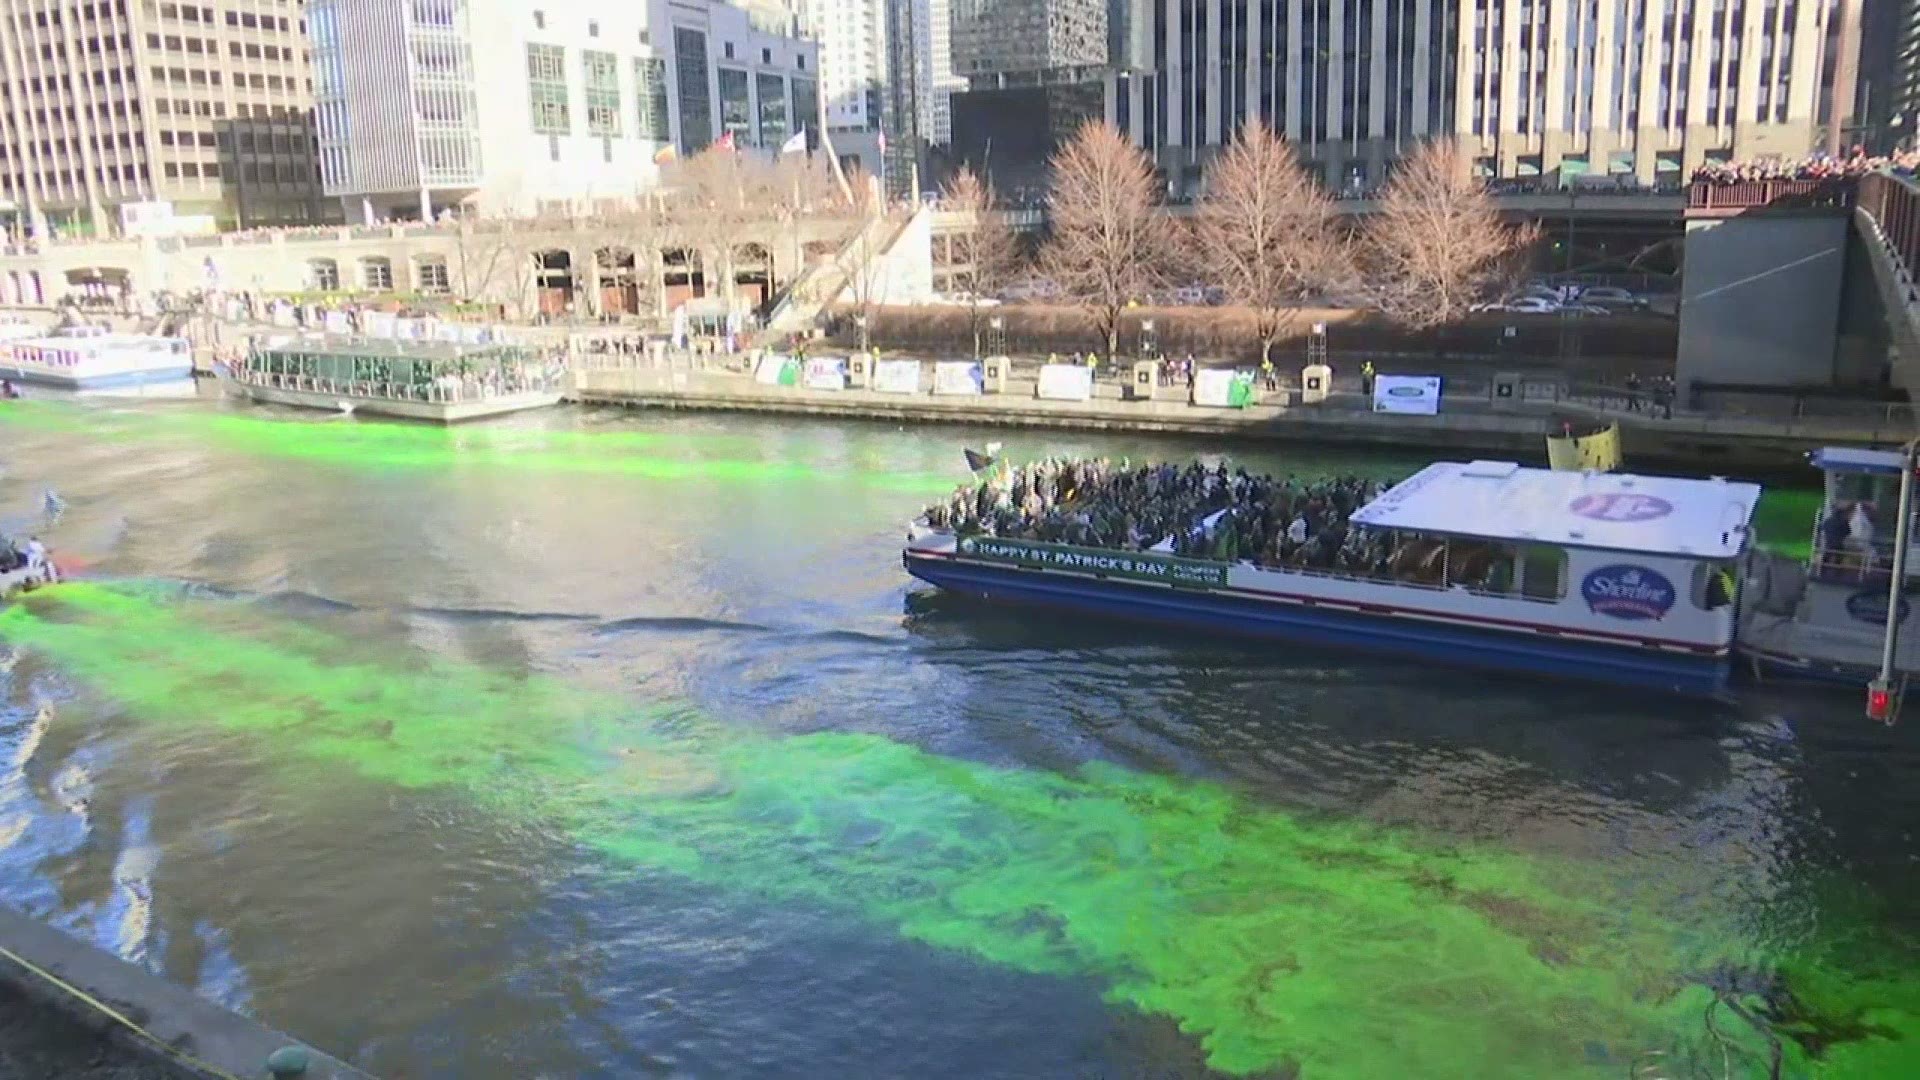 The Chicago River was on Saturday dyed green in honor of St. Patrick's Day, as the city prepared for its world-renowned parade.